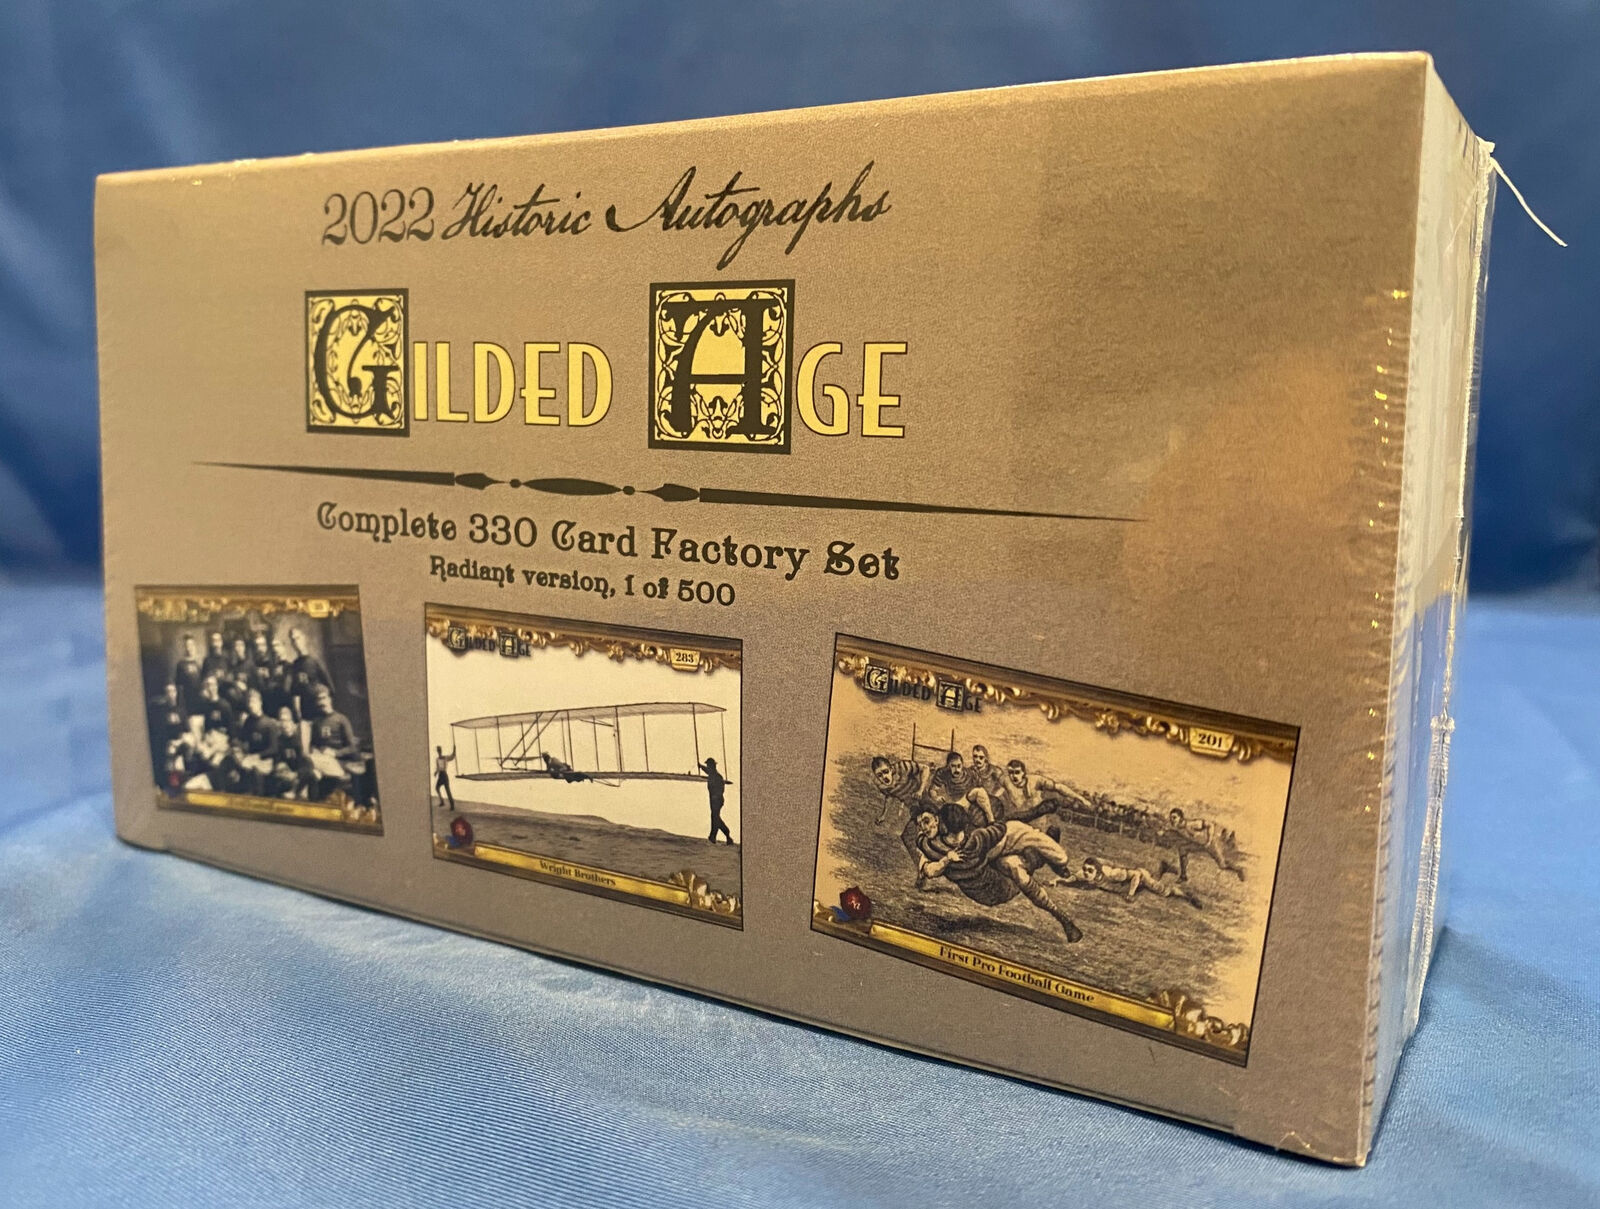 2022 Historic Autographs Gilded Age Factory Set - Radiant Version Limited to 500